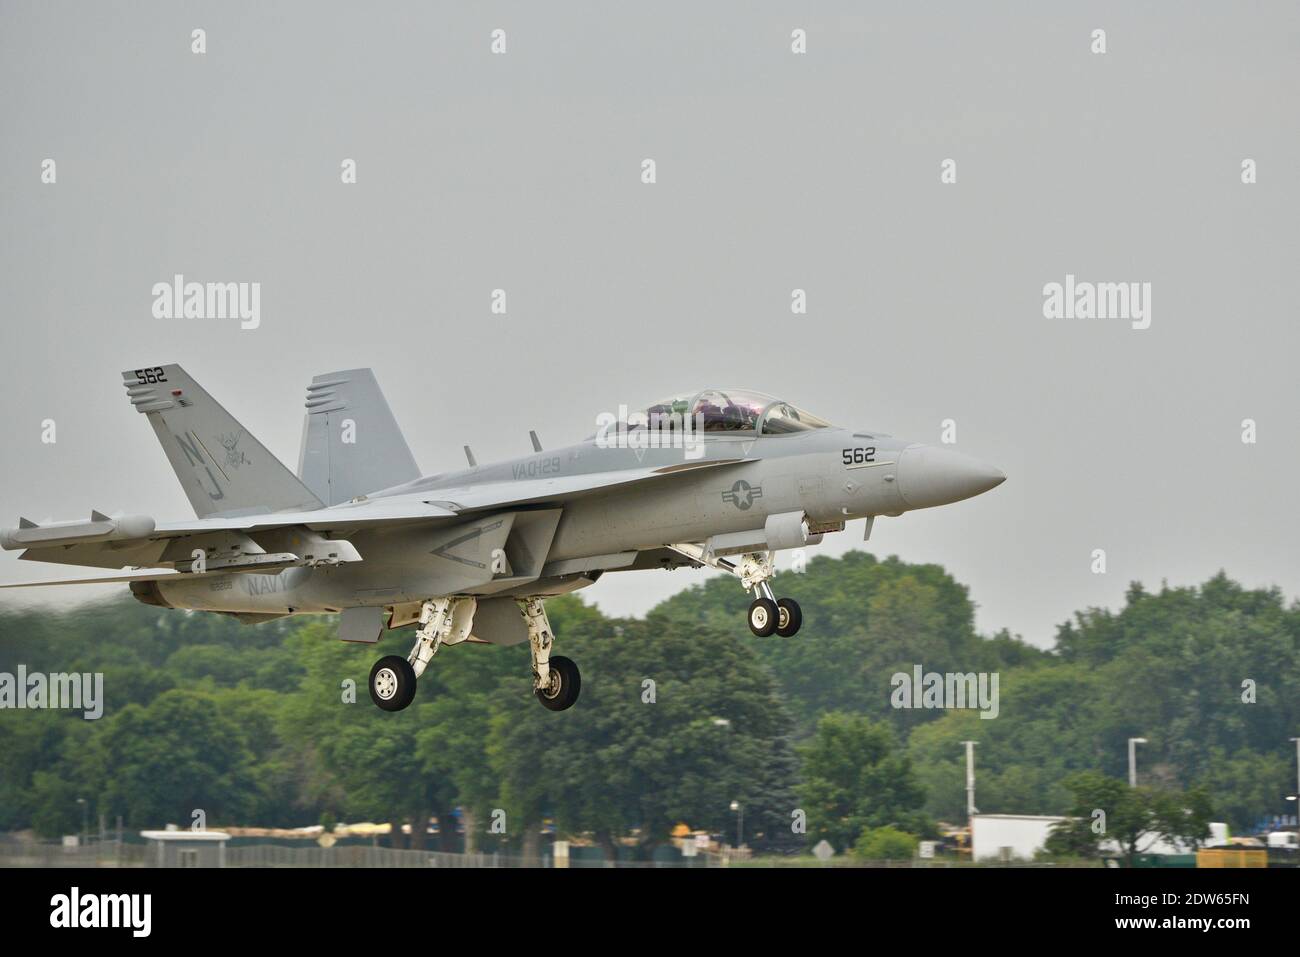 Flight demonstration featuring lethal capabilities of F-18 Super Hornet jet fighter at EAA AirVenture, Oshkosh, Wisconsin, USA Stock Photo